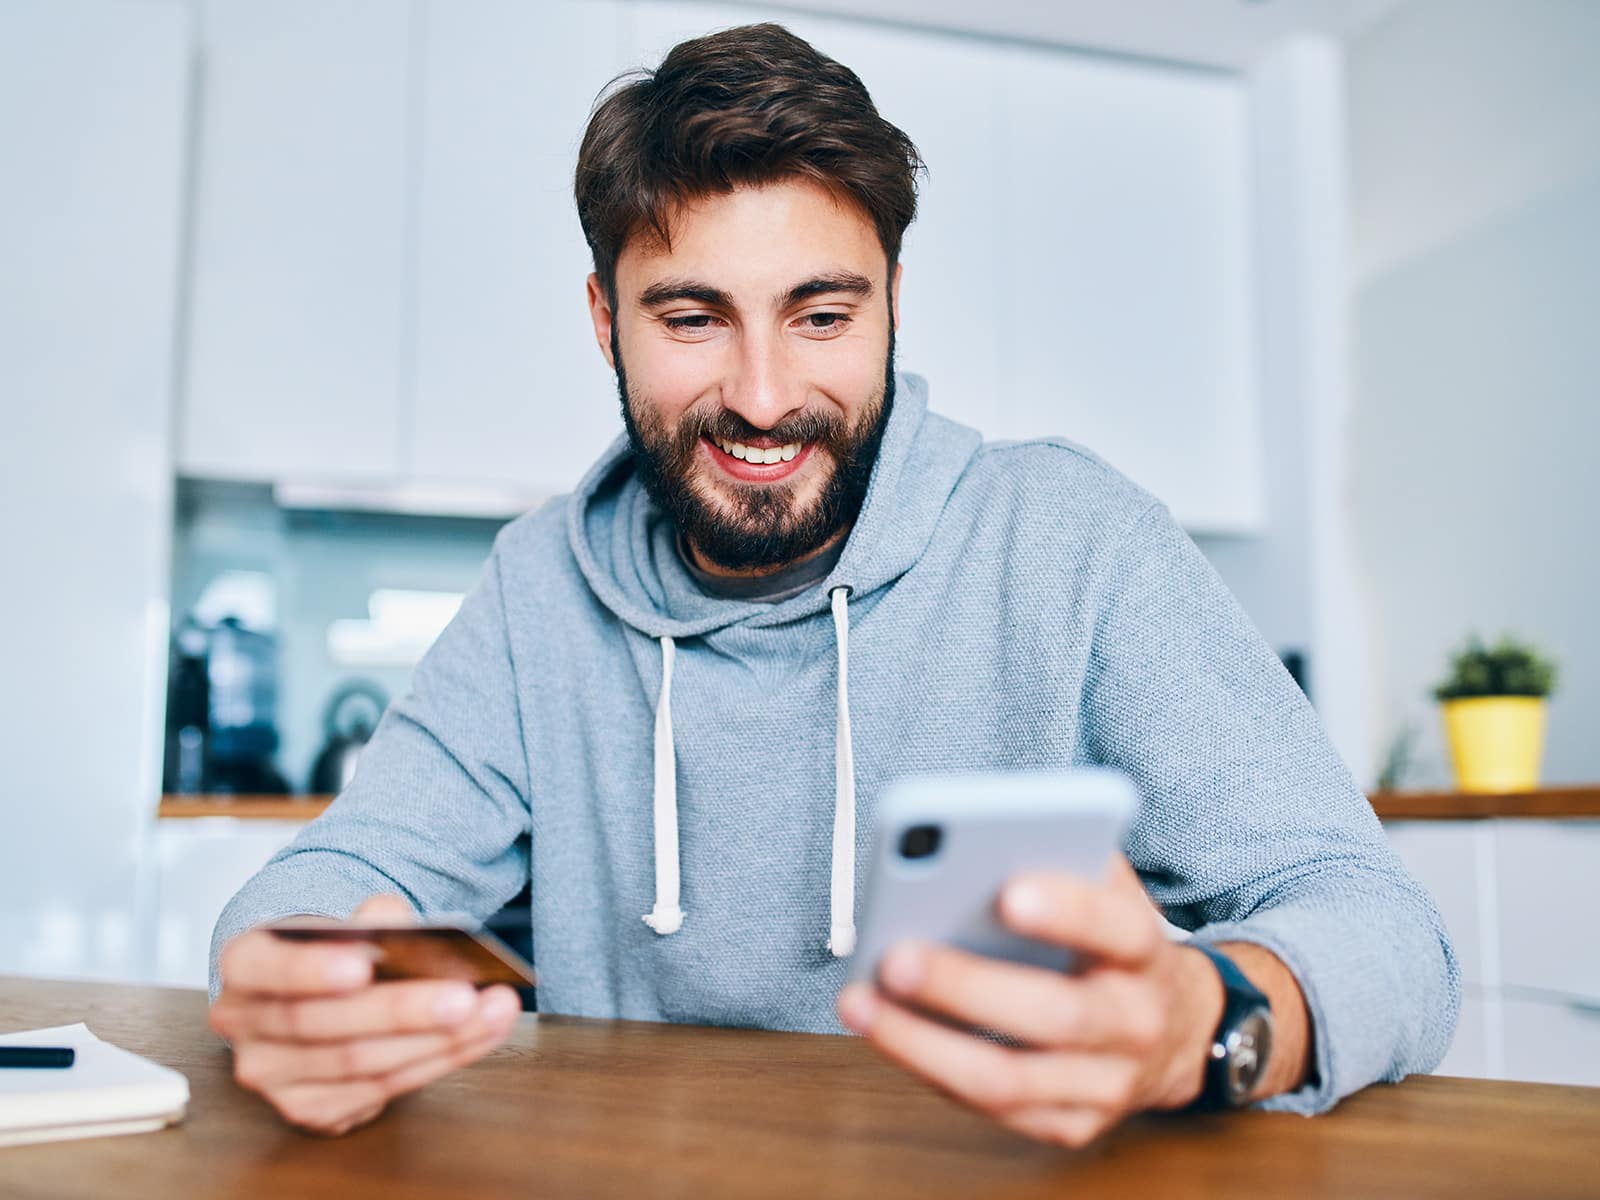 Guy in grey sweatshirt holding phone and credit card